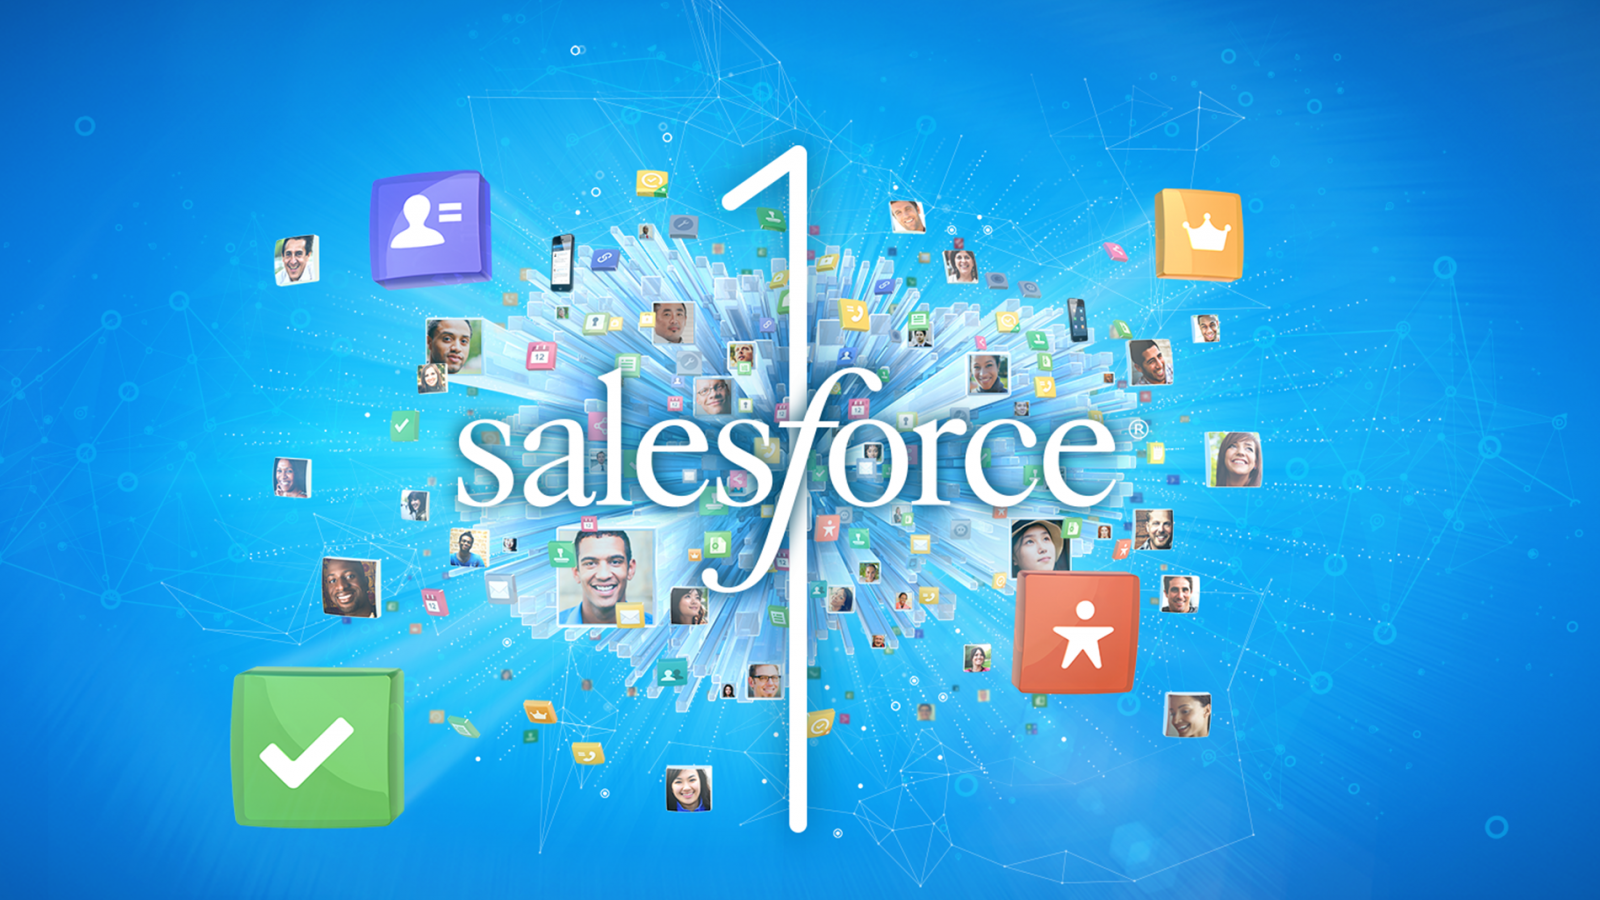 Free download Salesforce1 Confusing yes But its all about